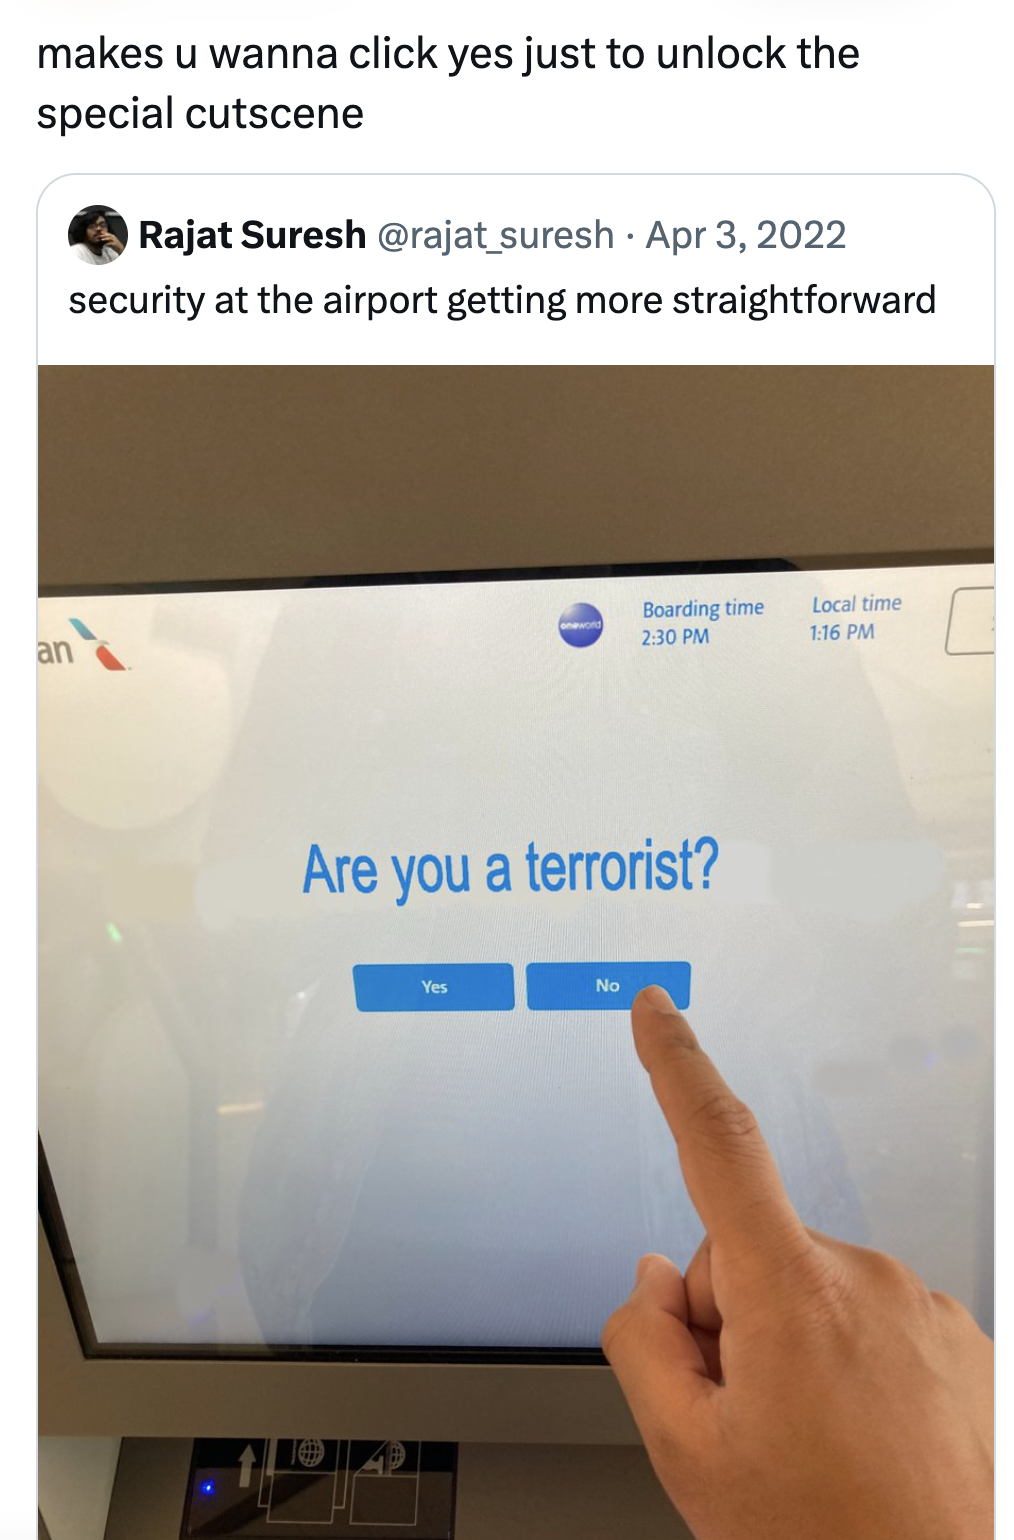 presentation - makes u wanna click yes just to unlock the special cutscene Rajat Suresh suresh security at the airport getting more straightforward an Boarding ome Local time 136 Pm Are you a terrorist?